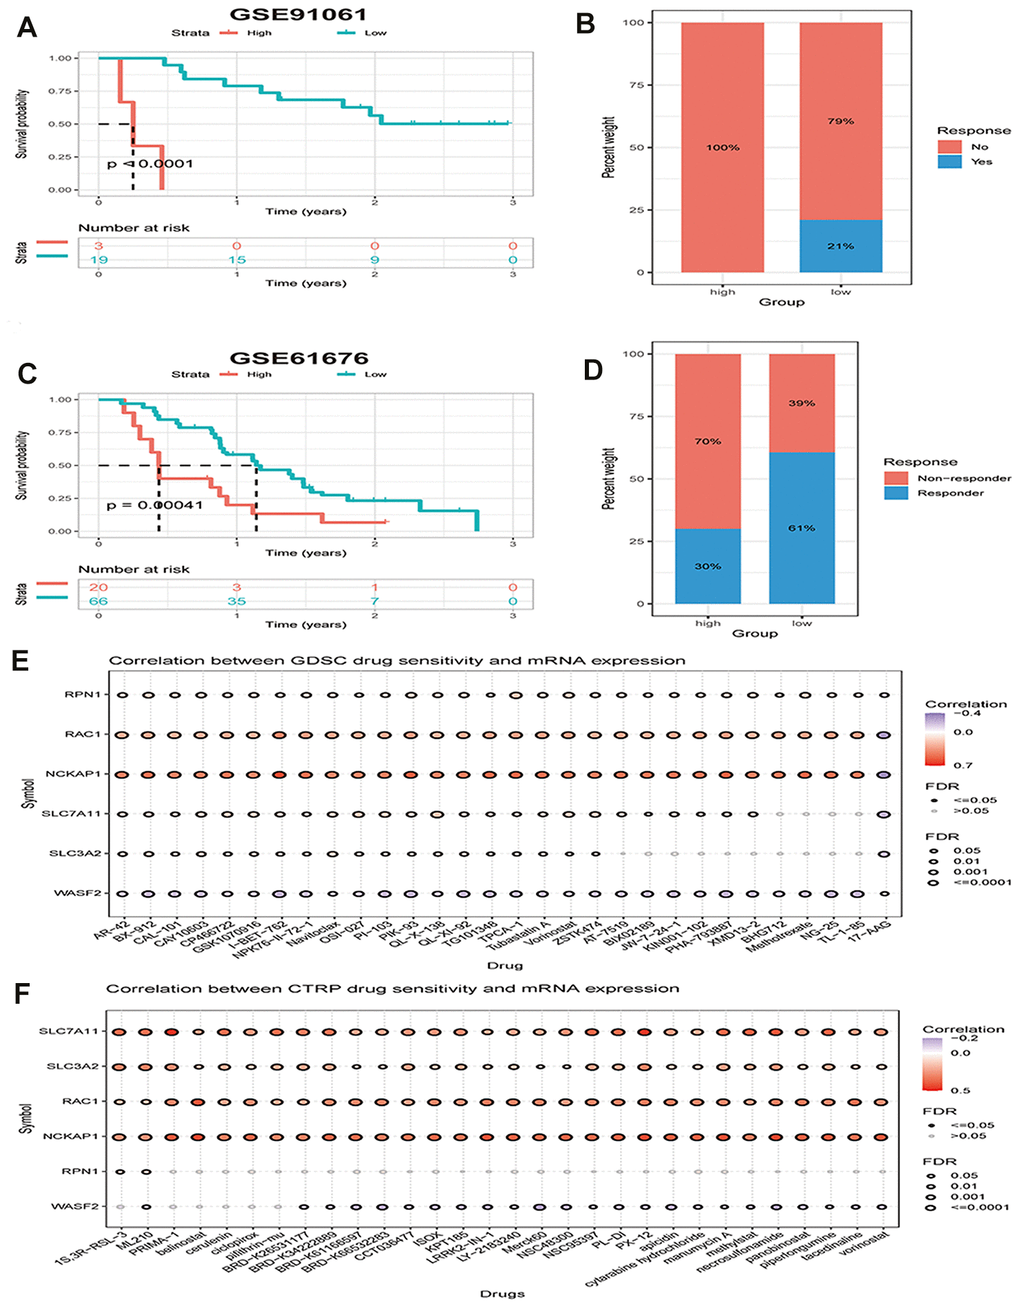 The disulfidptosis score is associated with response to therapy in multiple cancer types. (A) Kaplan–Meier curves of OS between low and high groups stratified by the disulfidptosis score in the melanoma immunotherapy dataset. (B) The response rate to immunotherapy in low and high groups stratified by disulfidptosis score in the melanoma dataset. (C) Kaplan-Meier curves for OS in late-stage non-squamous non-small cell lung cancer combined targeted therapy (bevacizumab + erlotinib) comparing low and high groups stratified by the disulfidptosis score. (D) The response rate to combined targeted therapy (bevacizumab + erlotinib) in late-stage non-squamous non-small cell lung cancer in low and high groups stratified by disulfidptosis score. (E, F) Bubble plot showing the relationship between mRNA expression of genes related to disulfidptosis in pan-cancer and GDSC or CTRP drug sensitivity (top 30). The color from blue to red represents the correlation between mRNA expression and IC50. Blue bubbles represent negative correlations; red bubbles represent positive correlations; the deeper the color, the higher the correlation. A positive correlation means that a gene with a high level of expression is resistant to the drug, and vice versa. The bubble size positively correlates with the FDR significance.